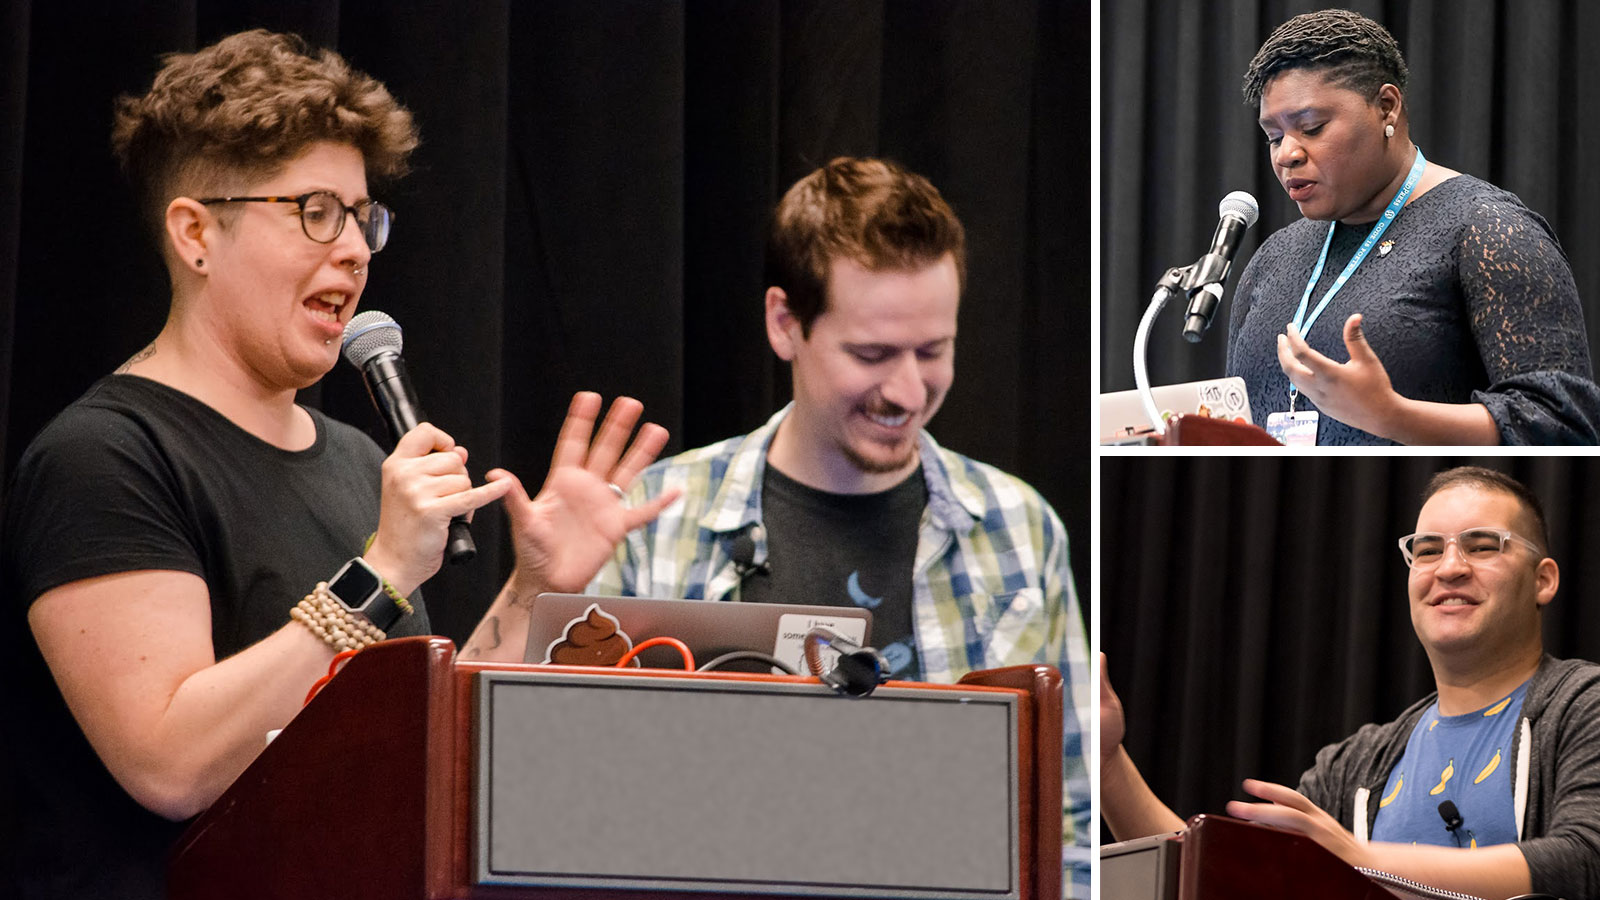 A collage of speakers from previous WordCamp US events including a pair at the podium with the person on the left gesturing with the microphone in right hand (on left); a person looking down at a laptop while gesturing with the left hand (top right); and a smiling person gesturing with the right hand.